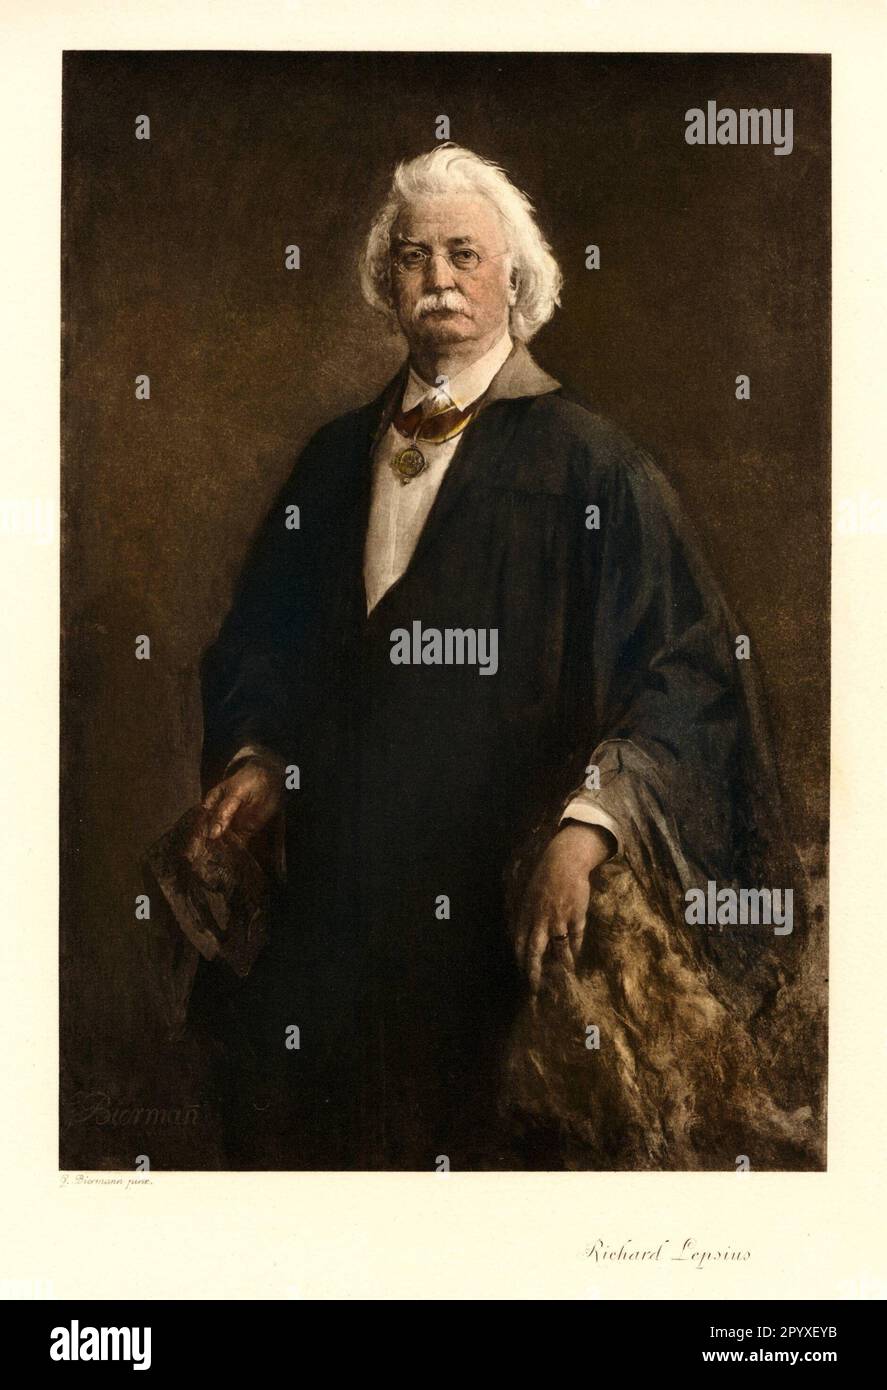 Karl Richard Lepsius (1810-1884), German Egyptologist and linguist. Lepsius is considered one of the founders of German Egyptology. Painting by G. Biermann. Photo: Heliogravure, Corpus Imaginum, Hanfstaengl Collection. [automated translation] Stock Photo